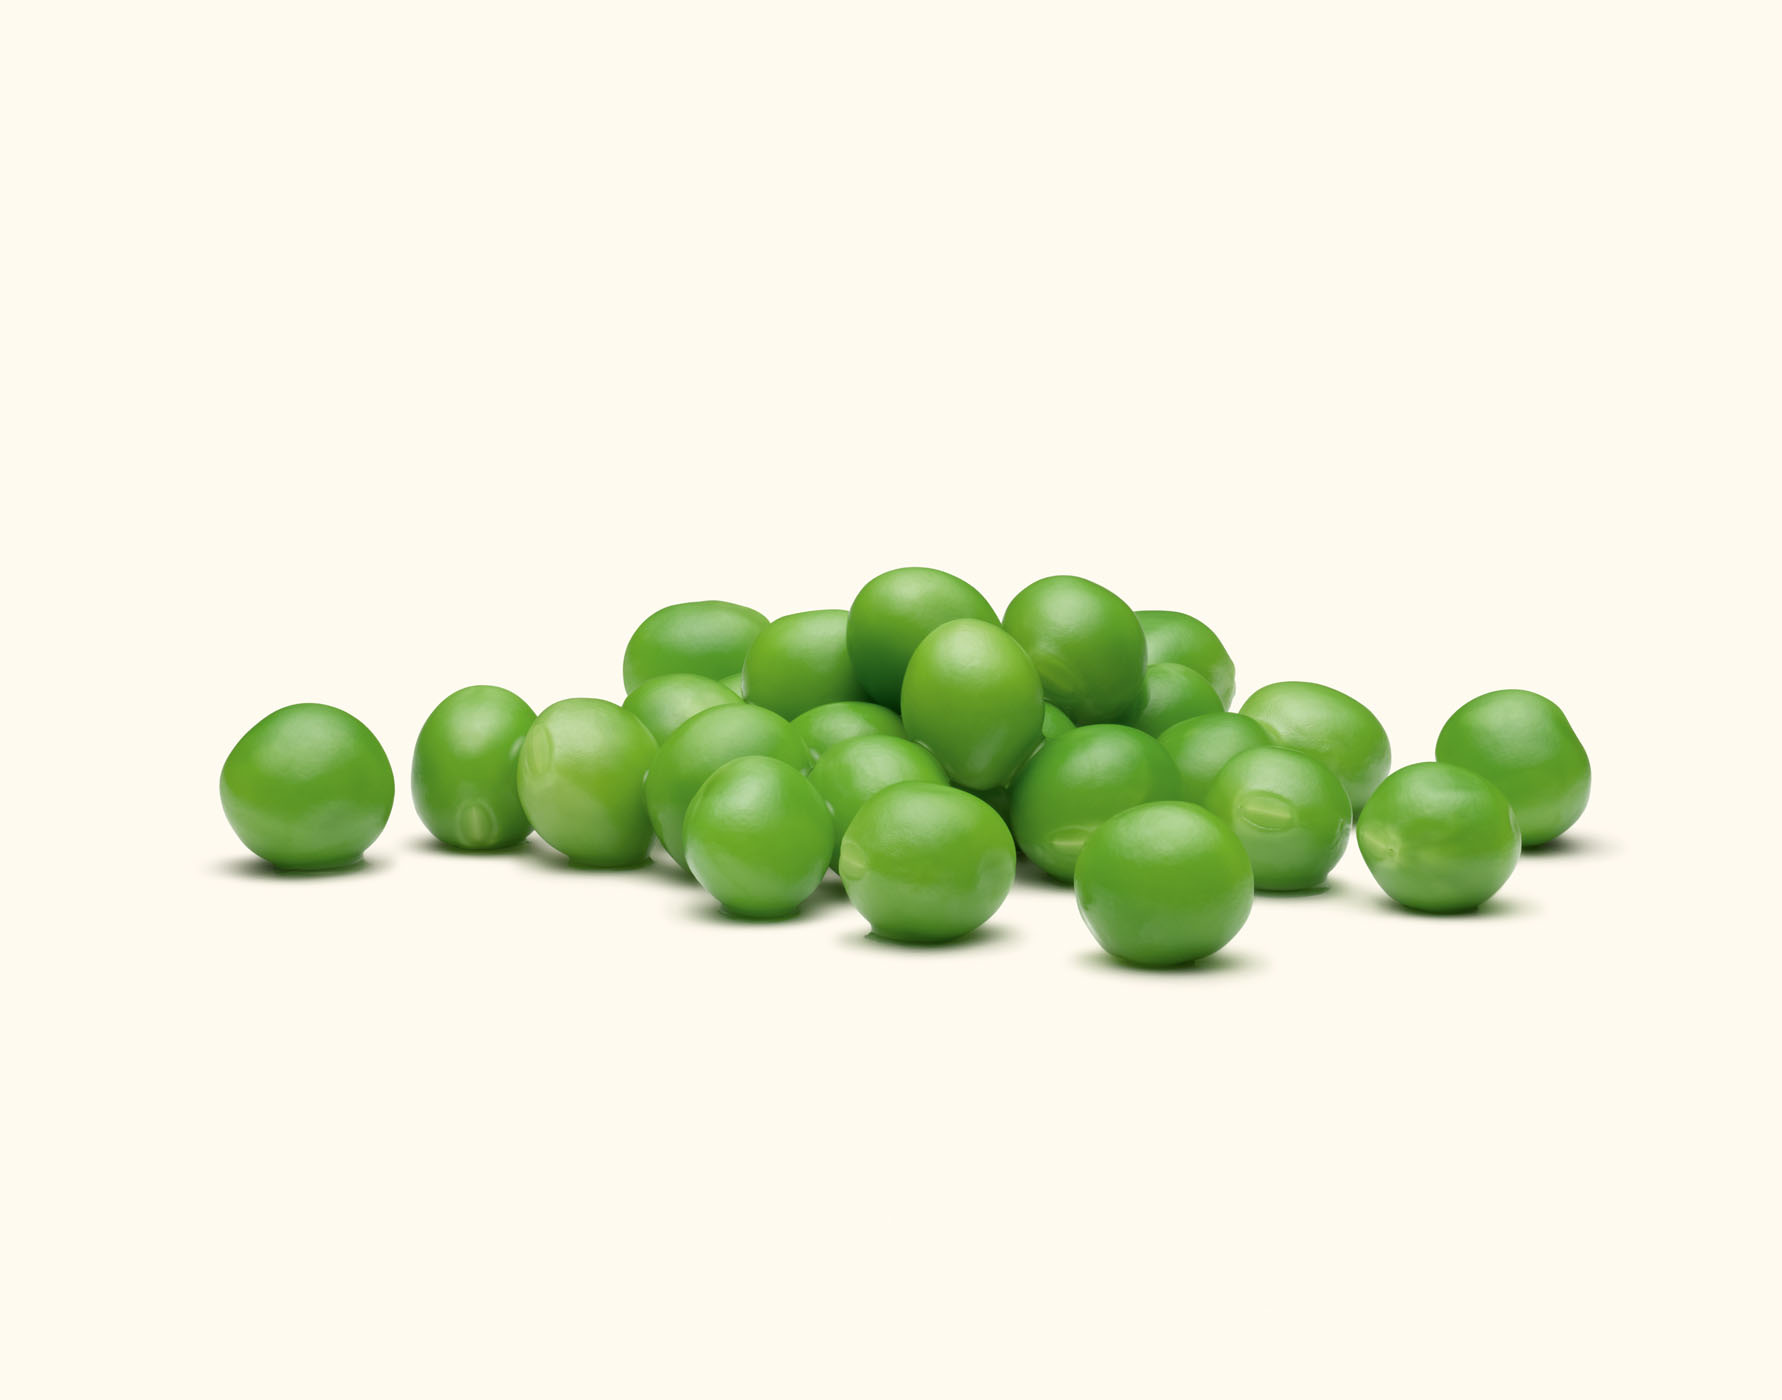 Peas by Alexander Kent London based still life and product photographer.